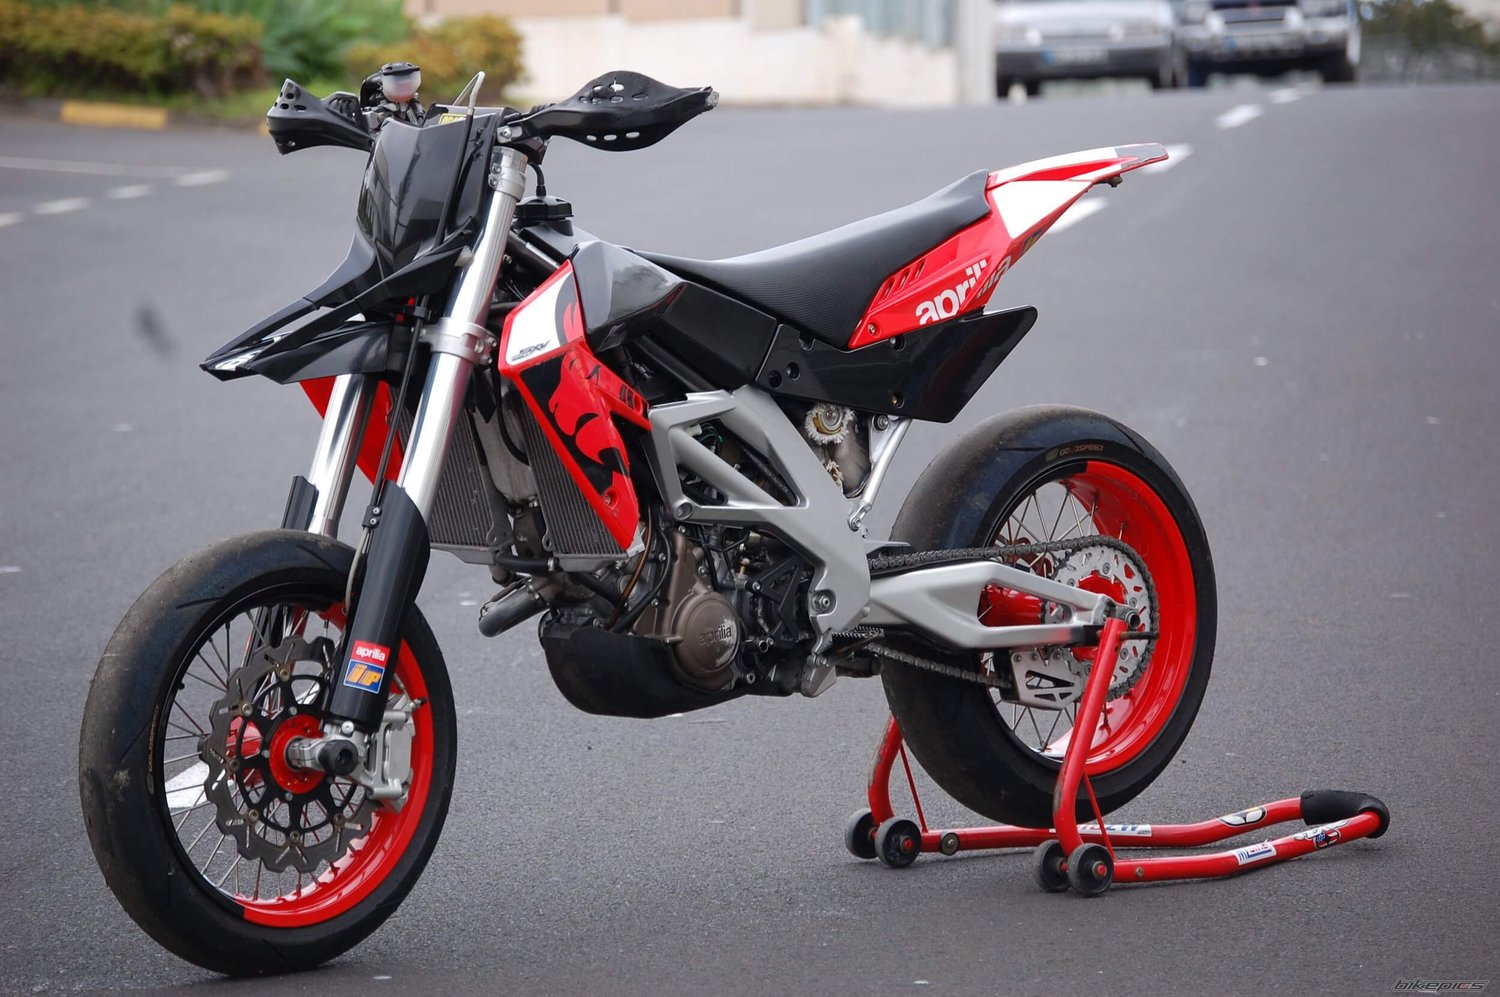 ortodoks Nedgang Aktiv These Are the 6 Best Factory Street Legal Dirt Bikes — Dirt Legal